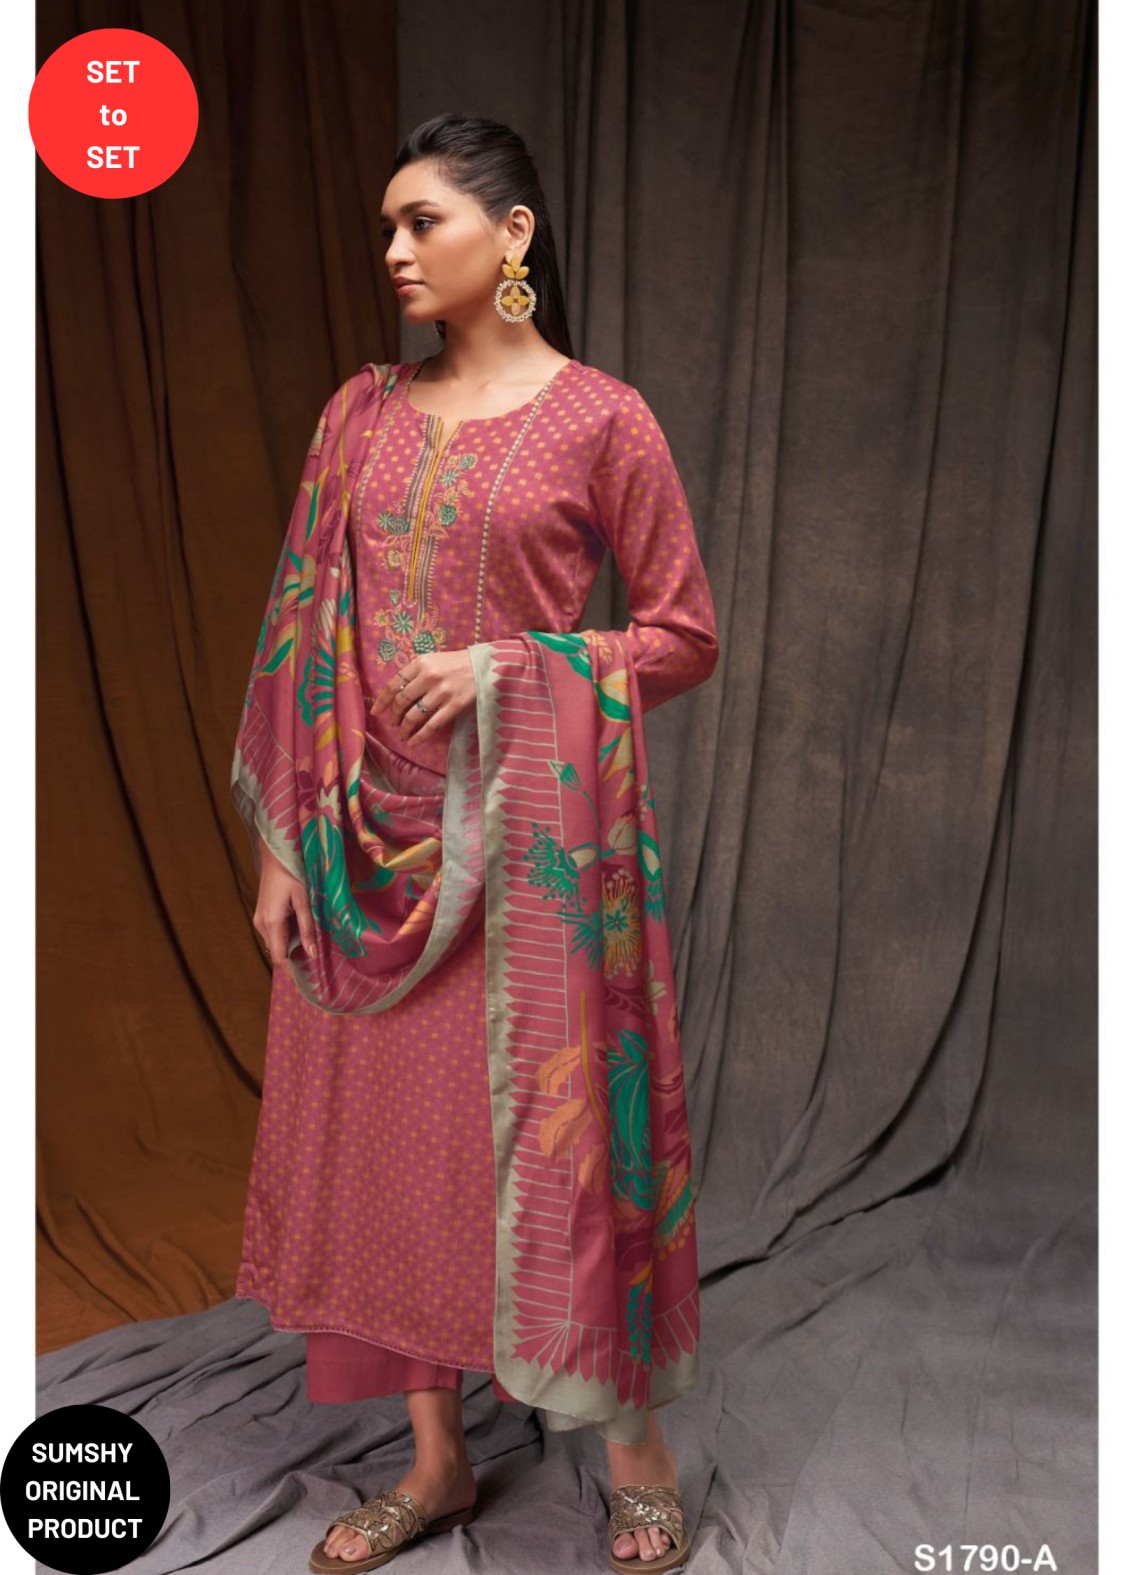 Ganga Inna S1334D - Premium Cotton Satin Printed With Embroidery Suit |  Embroidery suits, Fashion, Fashion catalogue